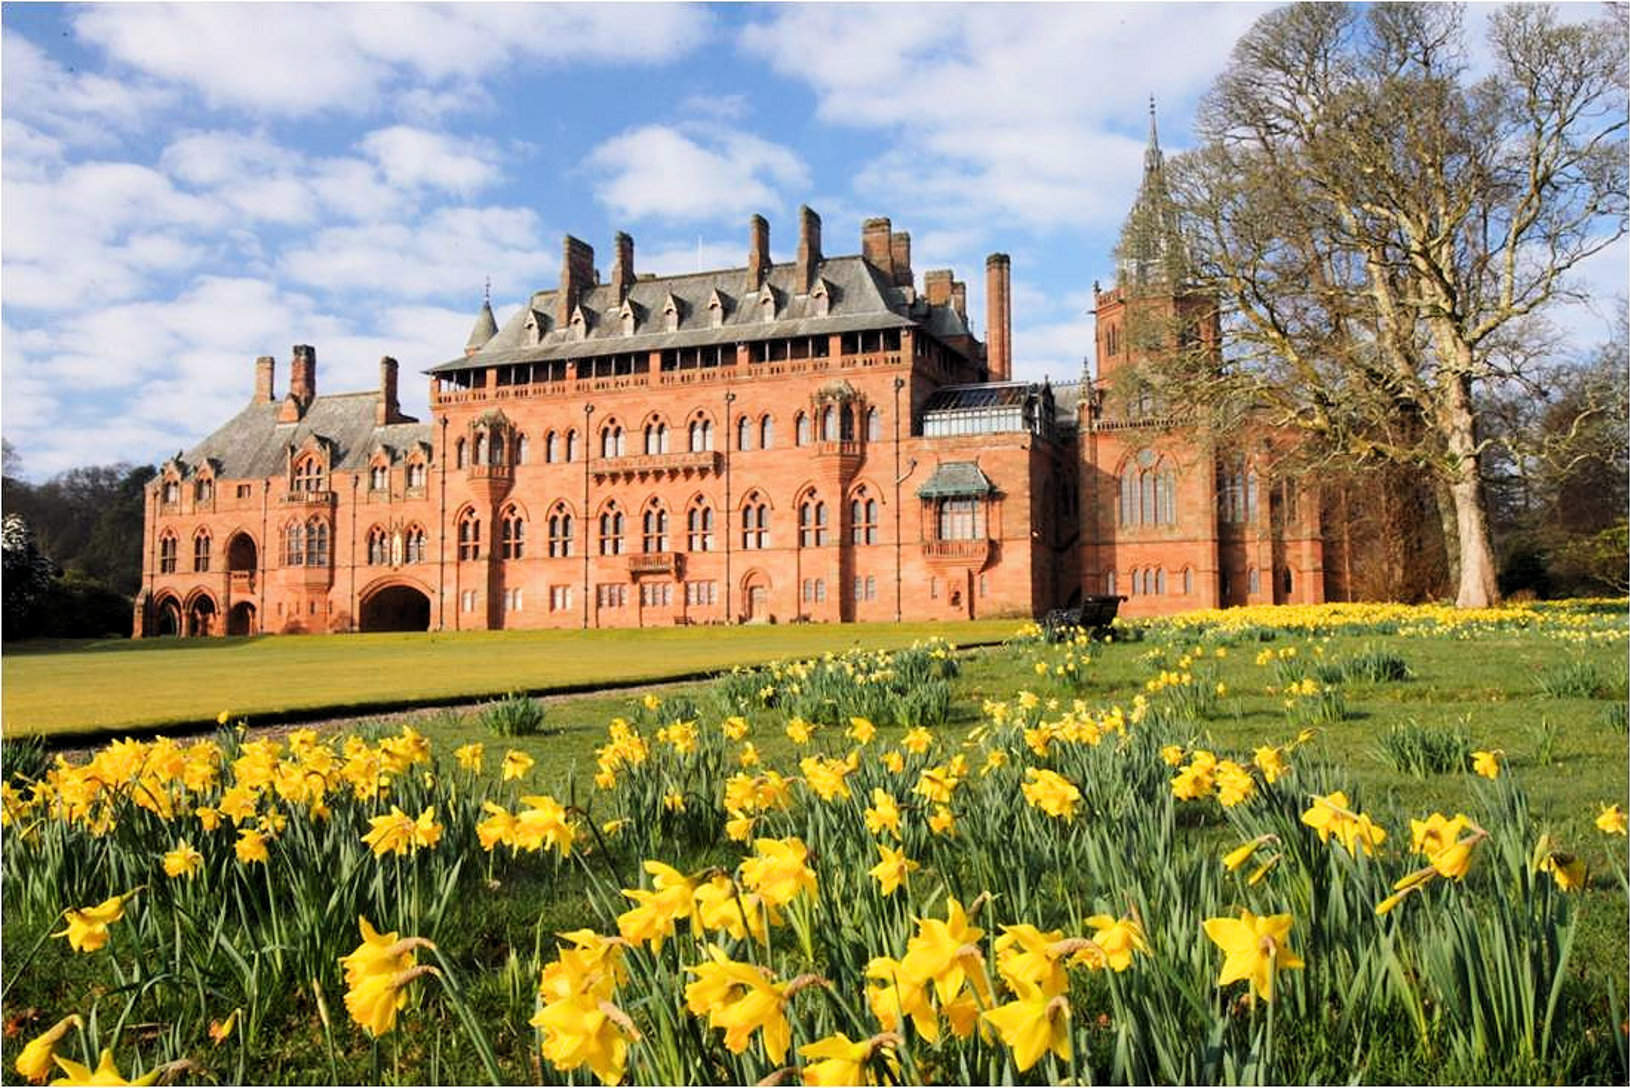 Situated on the Isle of Bute, the Mount Stuart House is the magnificent architectural fantasy of Robert Rowland Anderson